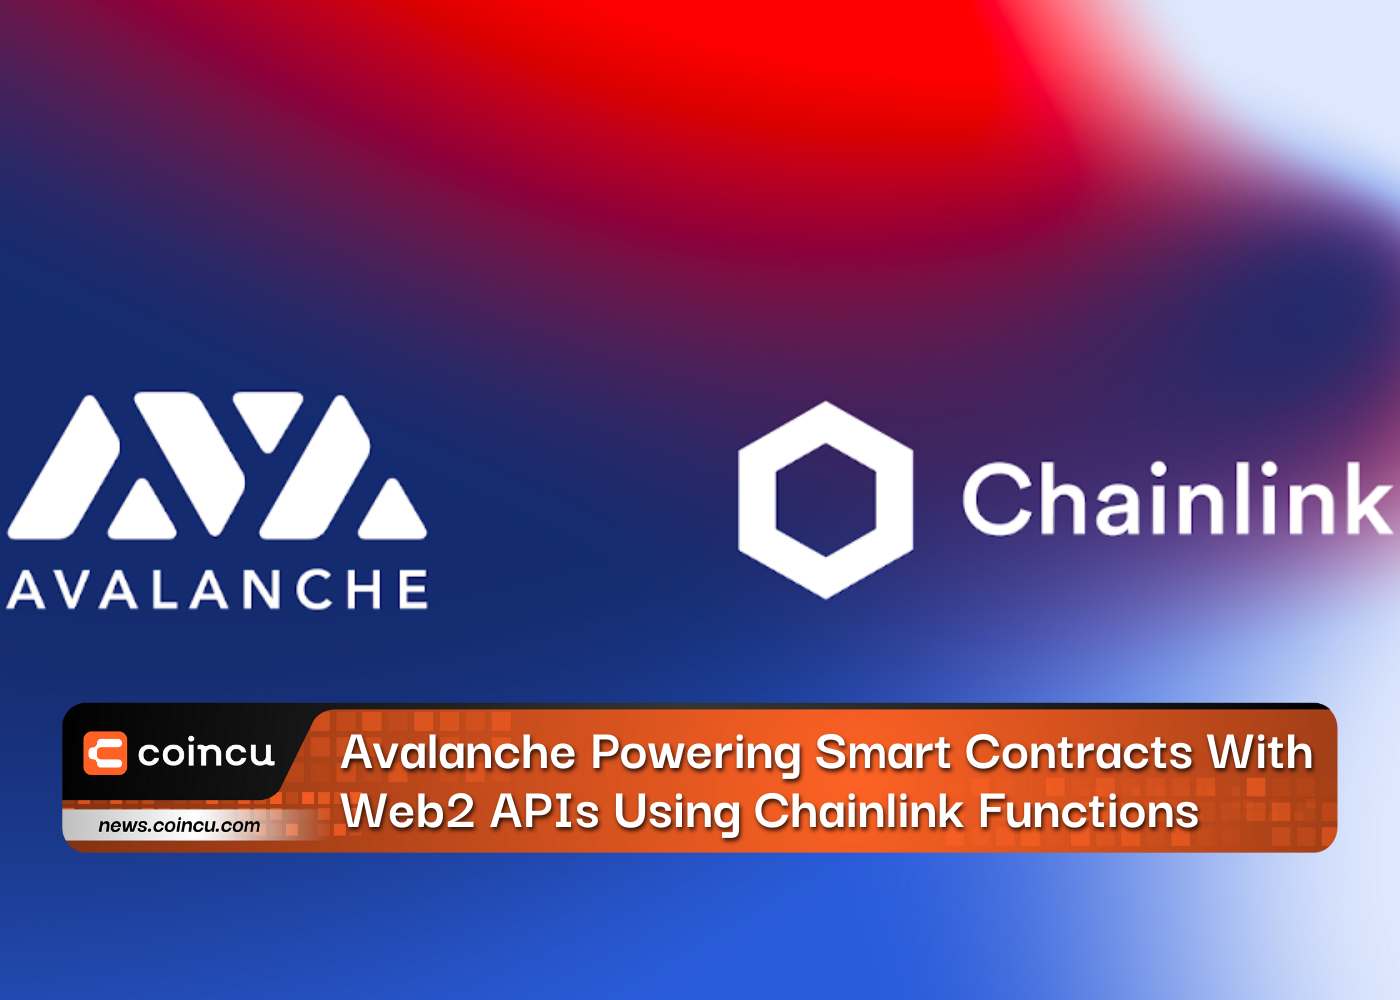 Avalanche Powering Smart Contracts With Web2 APIs Using Chainlink Functions